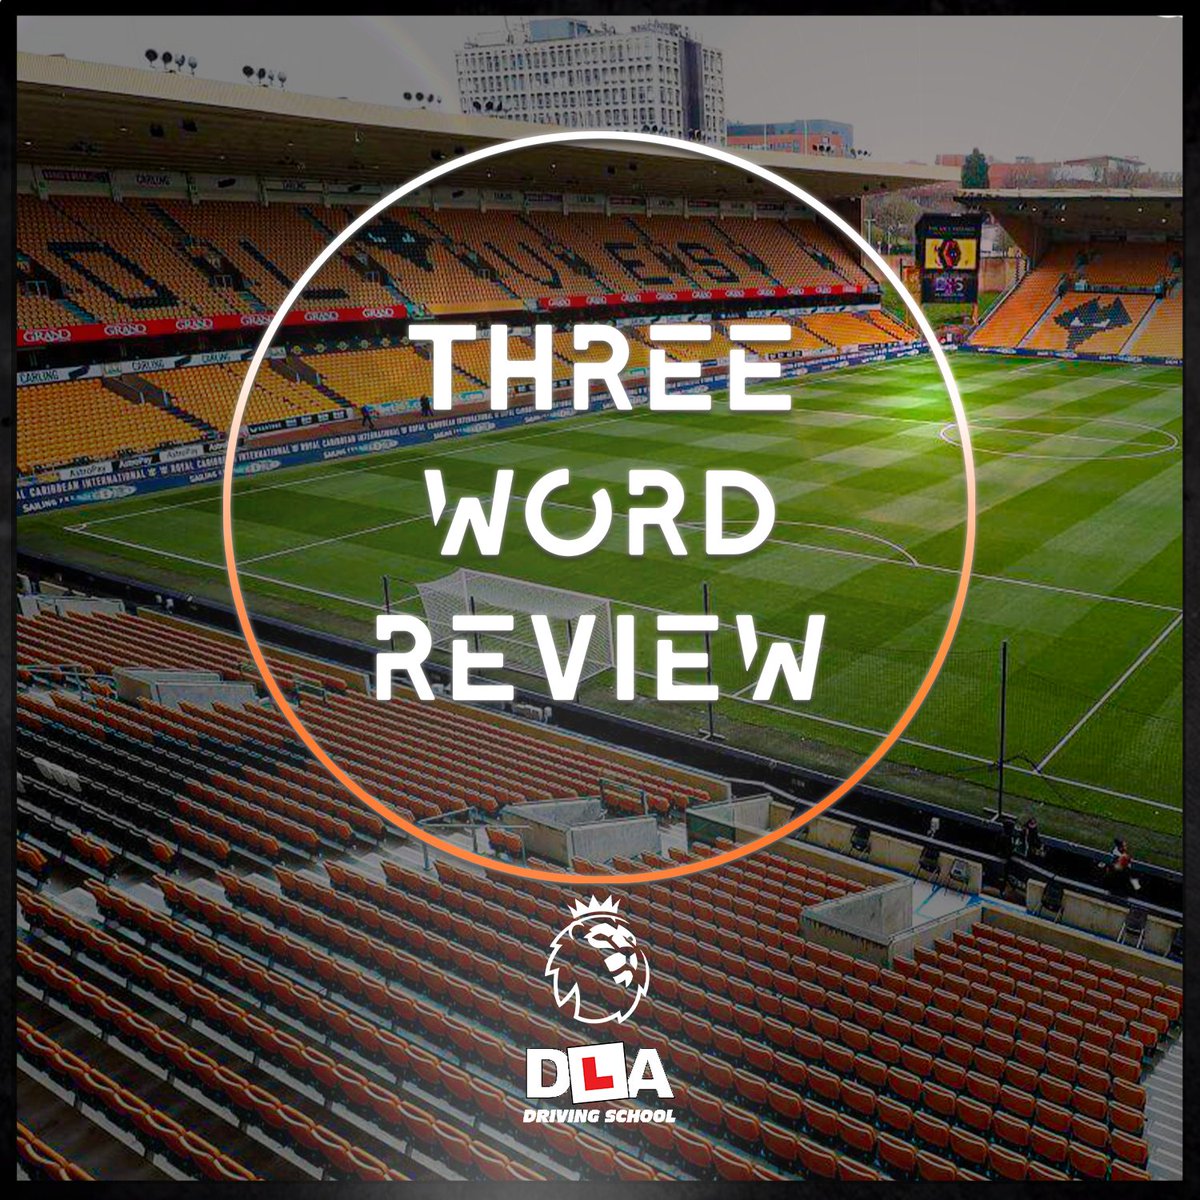 Give us your #3WordReviews of the game today 🔽 Sponsored by @dla_driving 🚗 #COYH #LTFC #PremierLeague